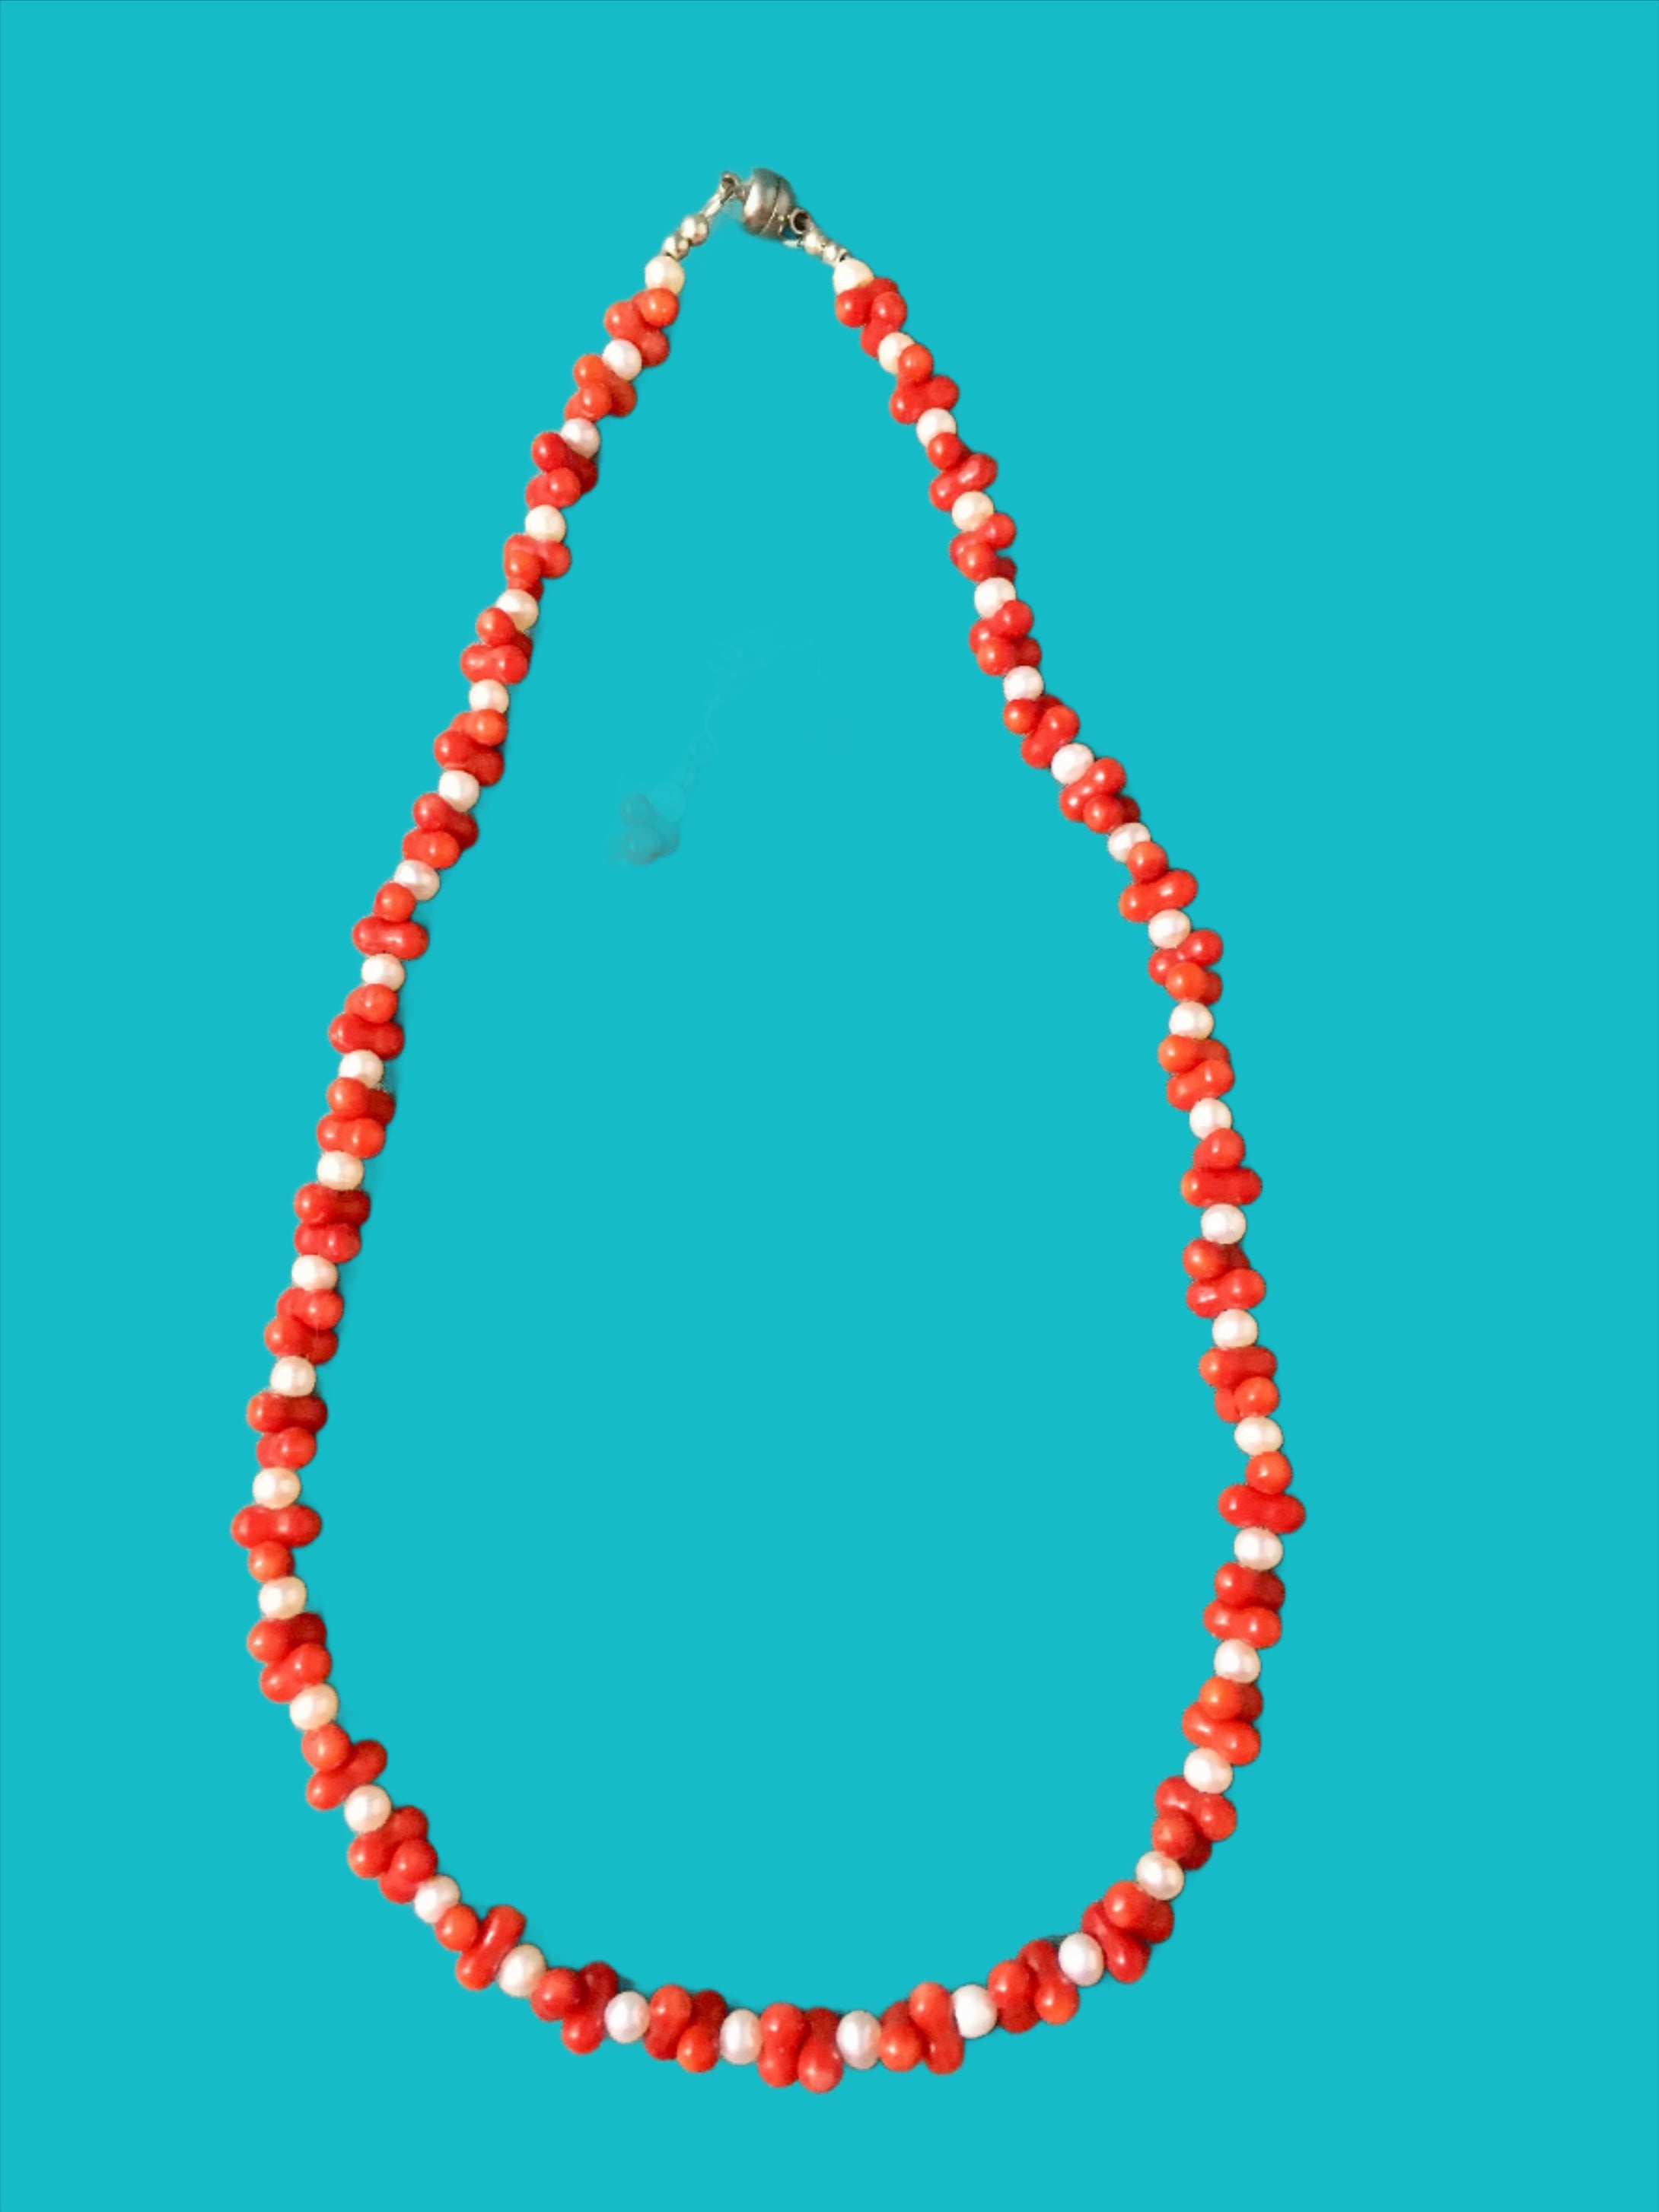 Red Coral Beads, Freshwater White Pearls. 18